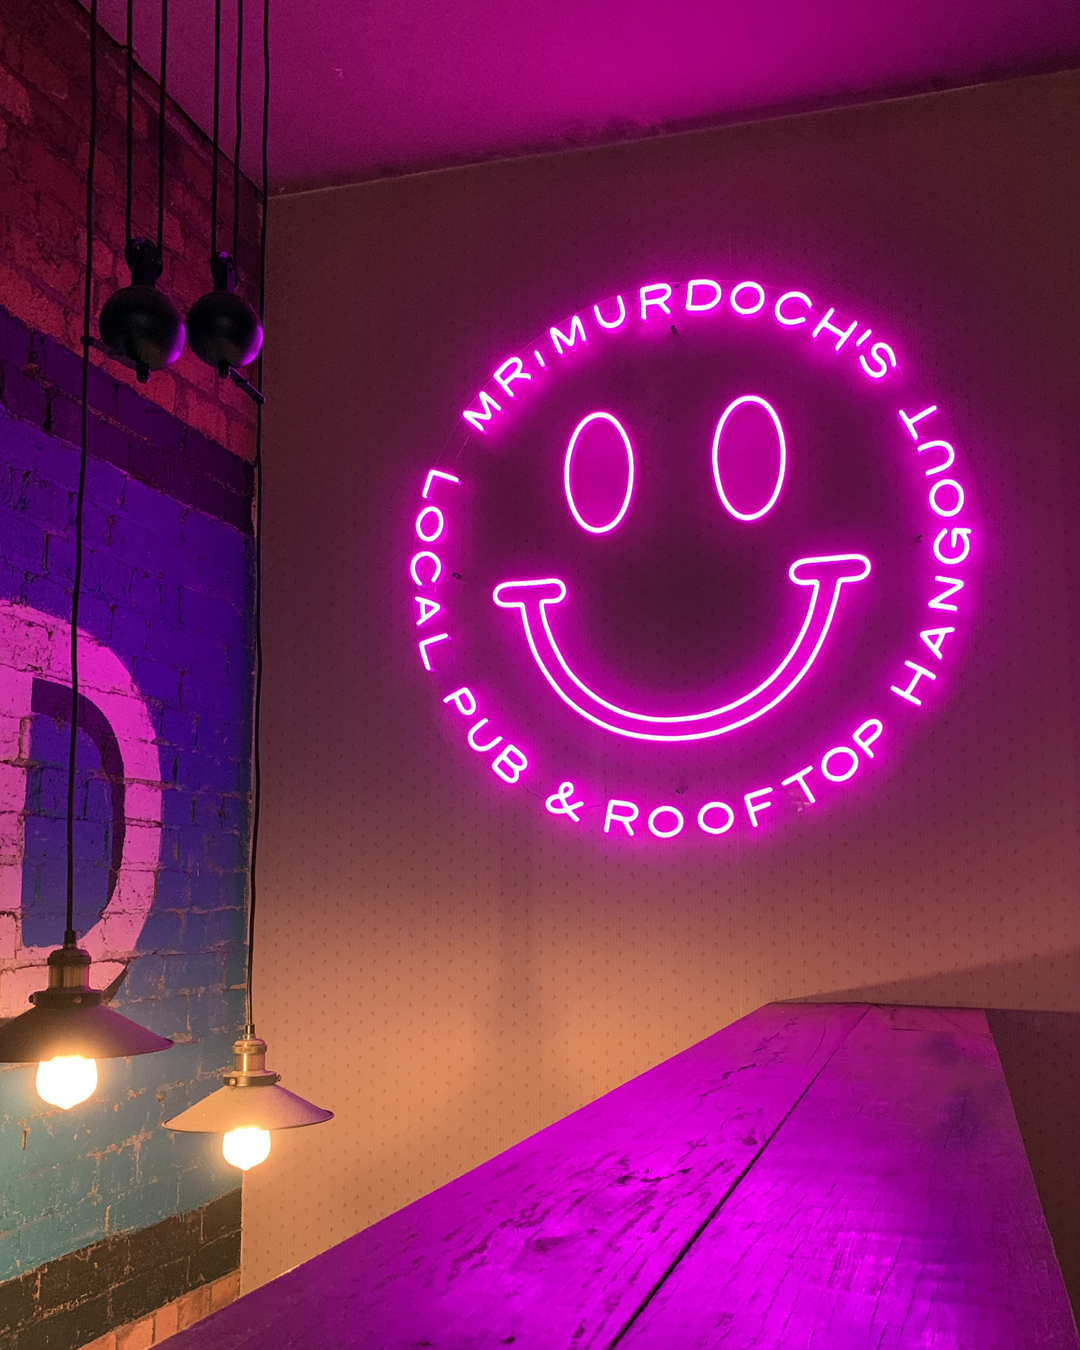 a personalized neon sign with a smiley face and text saying ‘Mr. Murdoch’s Local Pub & Rooftop